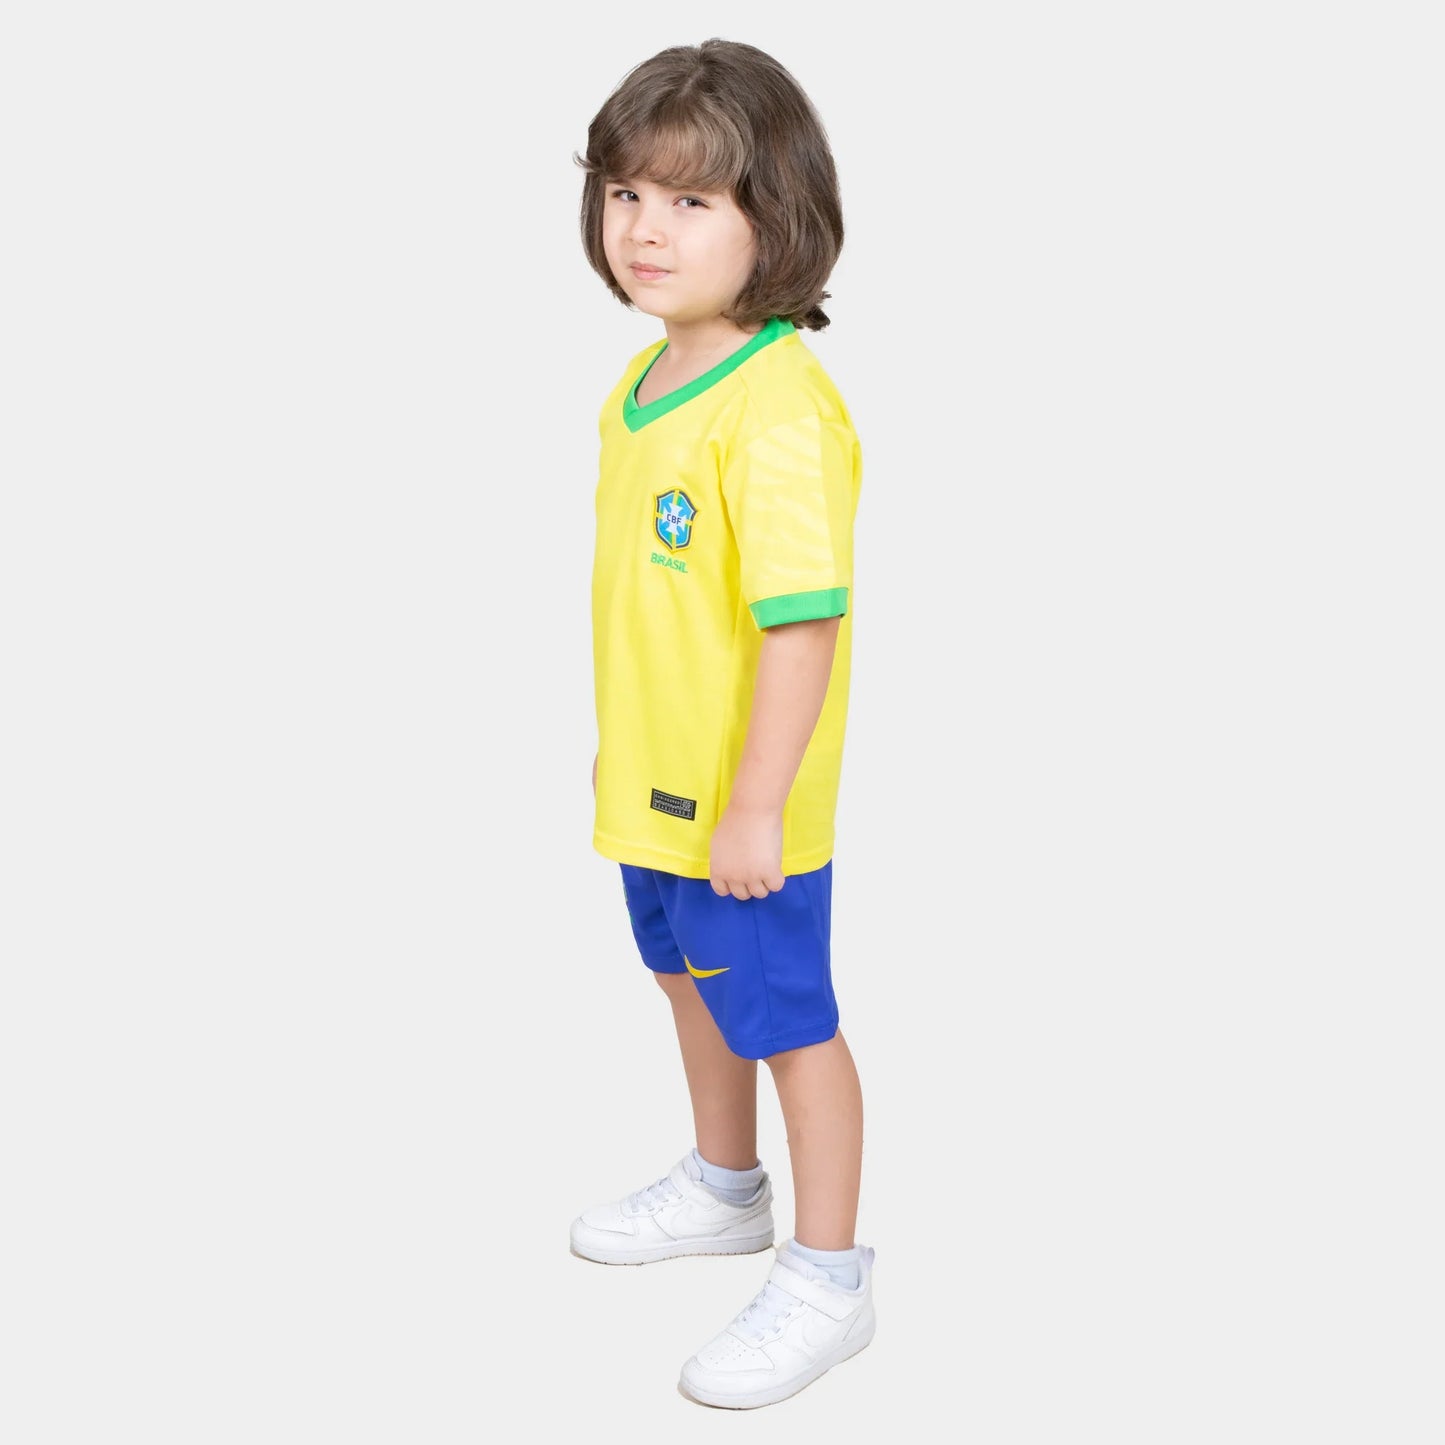 Brazil Kids Kit Home Season 23/24 Designed By Mitani Store , Regular Fit Jersey Short Sleeves And V-Neck Collar In Yellow Color